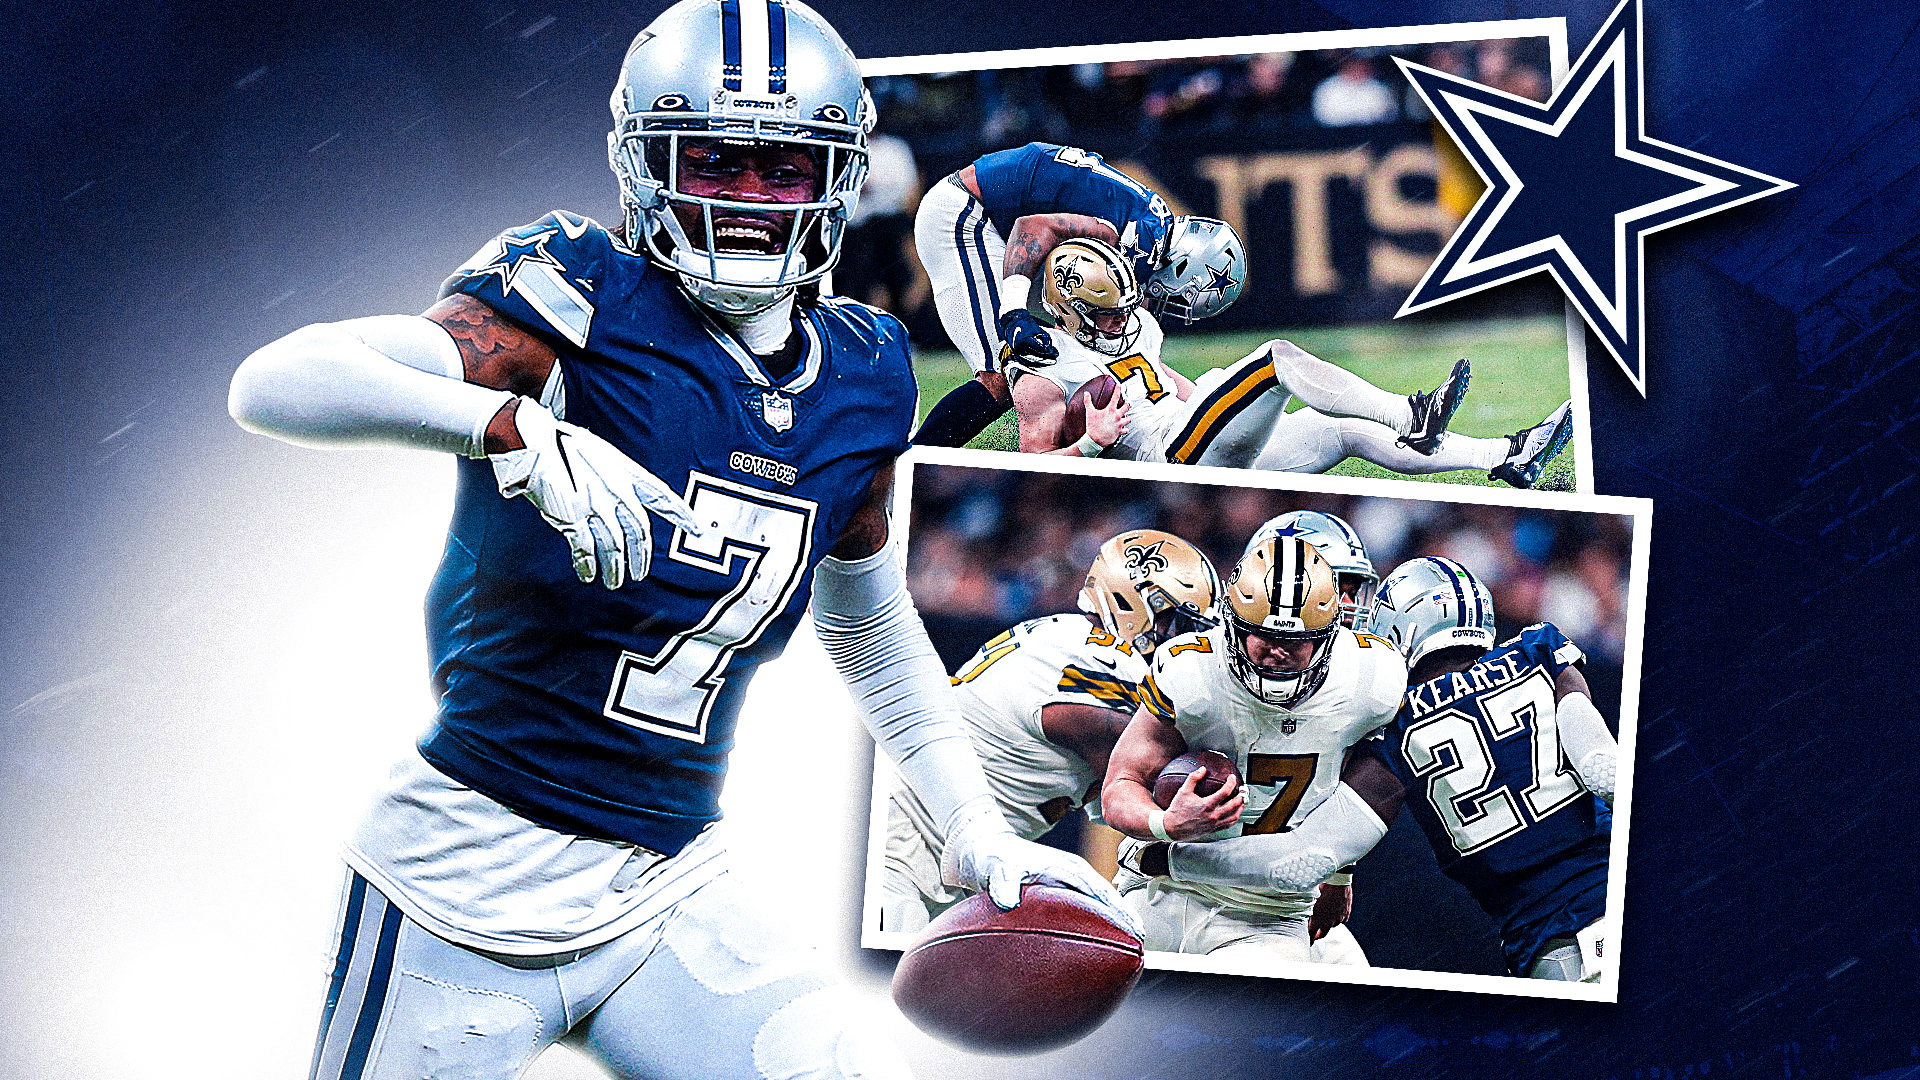 Cowboys lean on defense to beat Saints, but did the win prove Dallas is back?